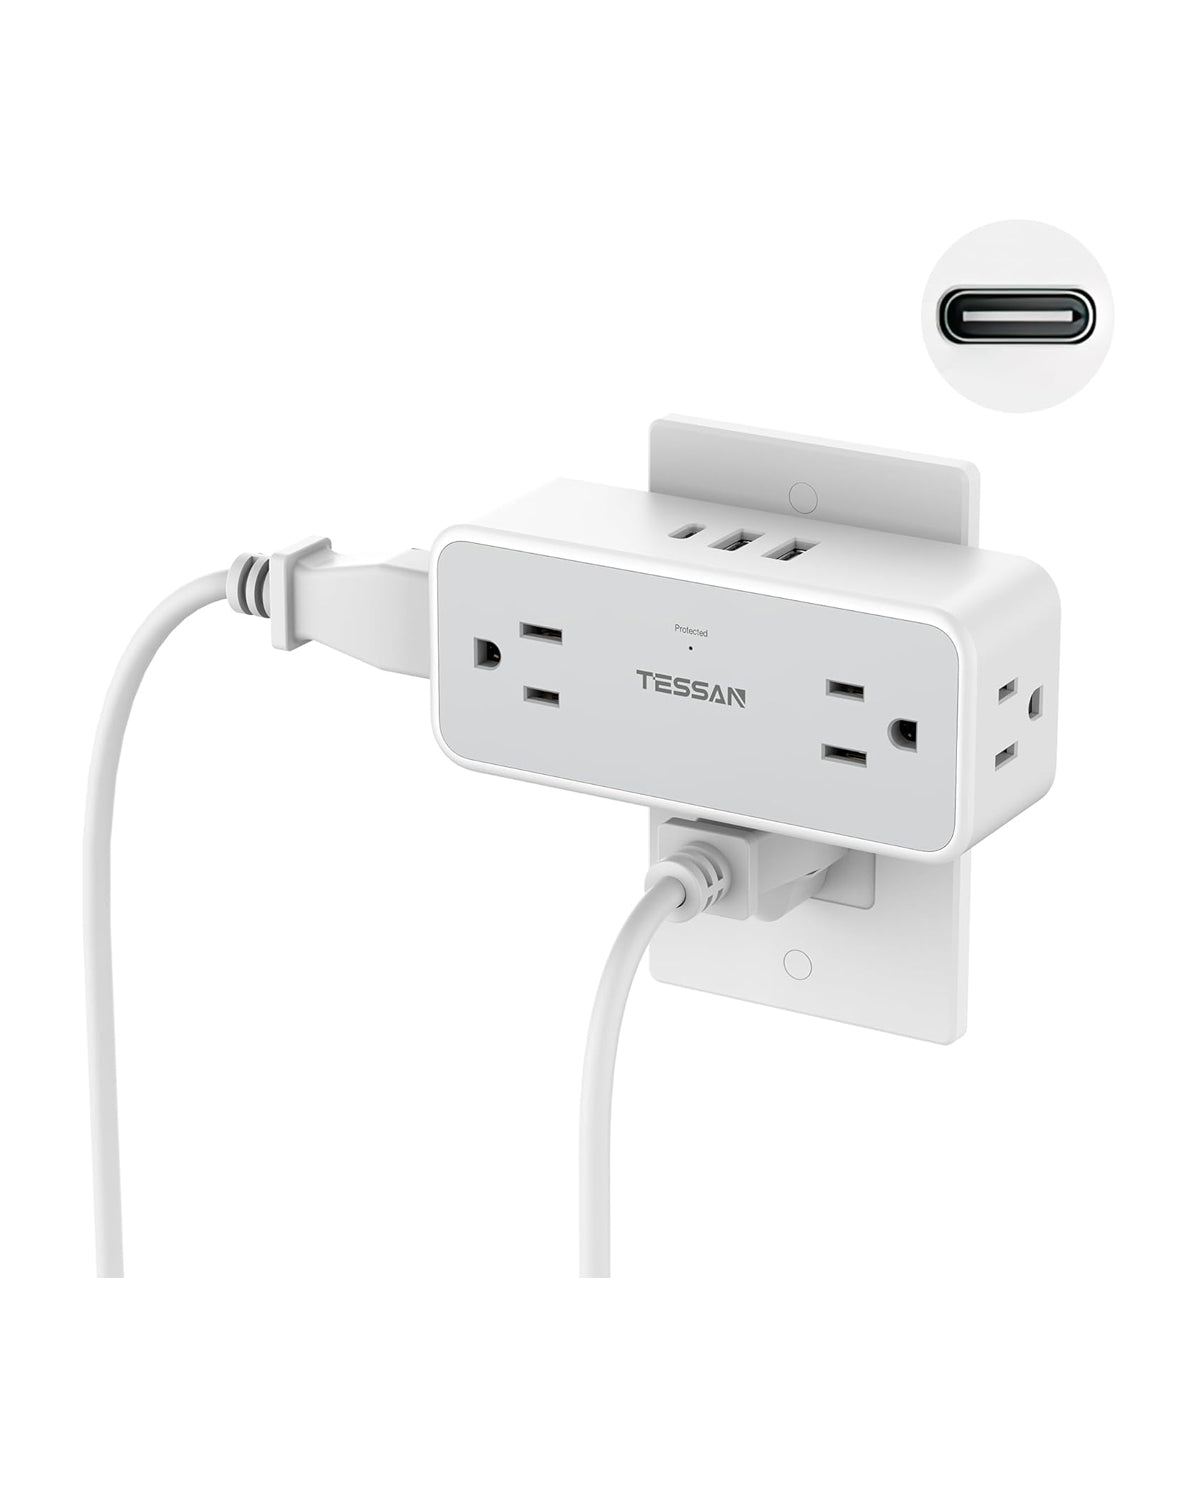 TESSAN 4 Wall Outlet Extender with 3 USB Wall Charger(1 USB C)